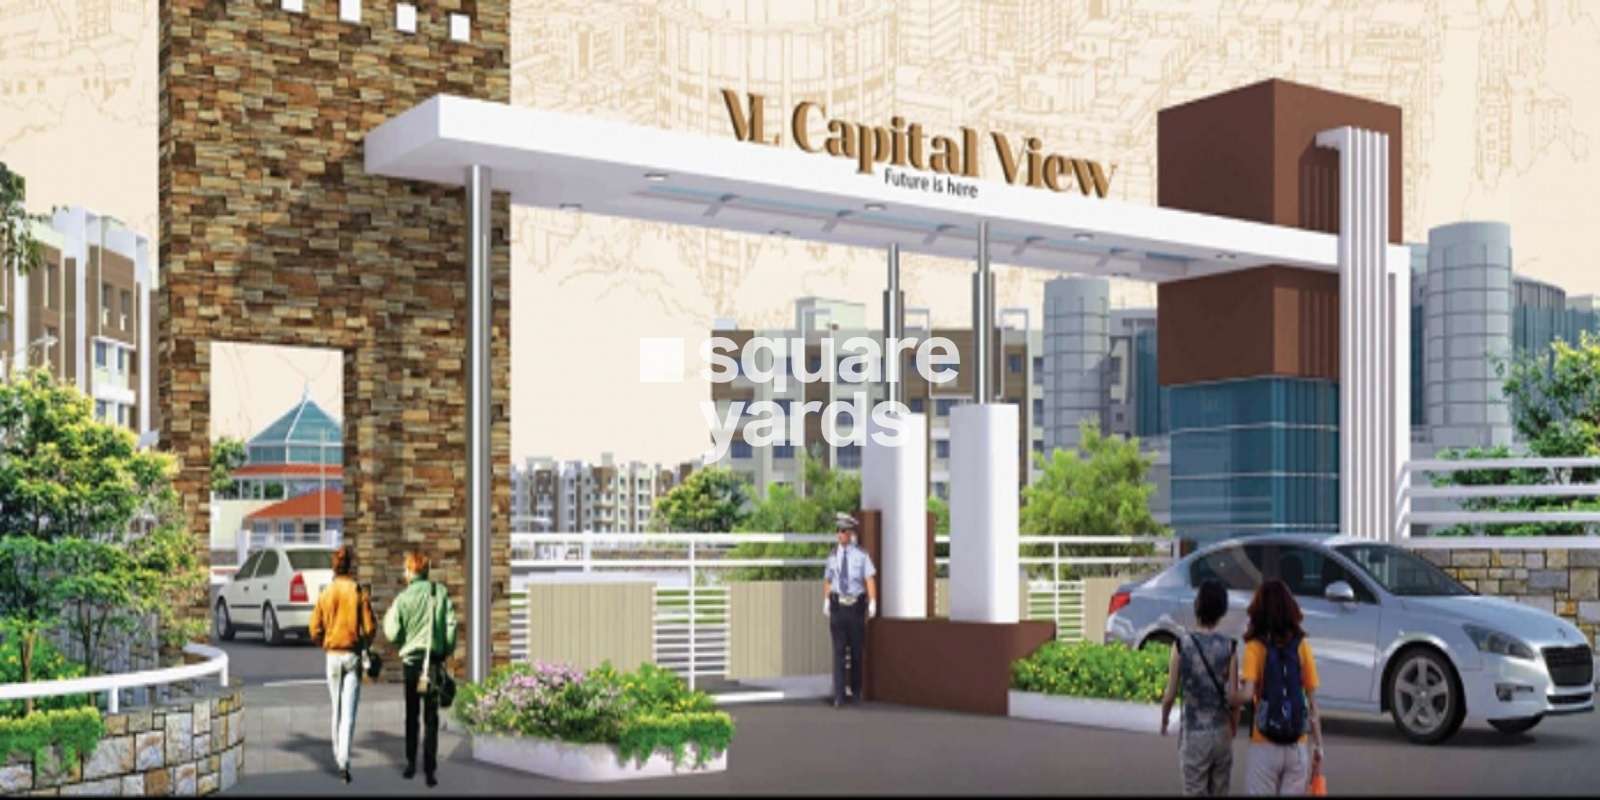 VL Capital View Cover Image